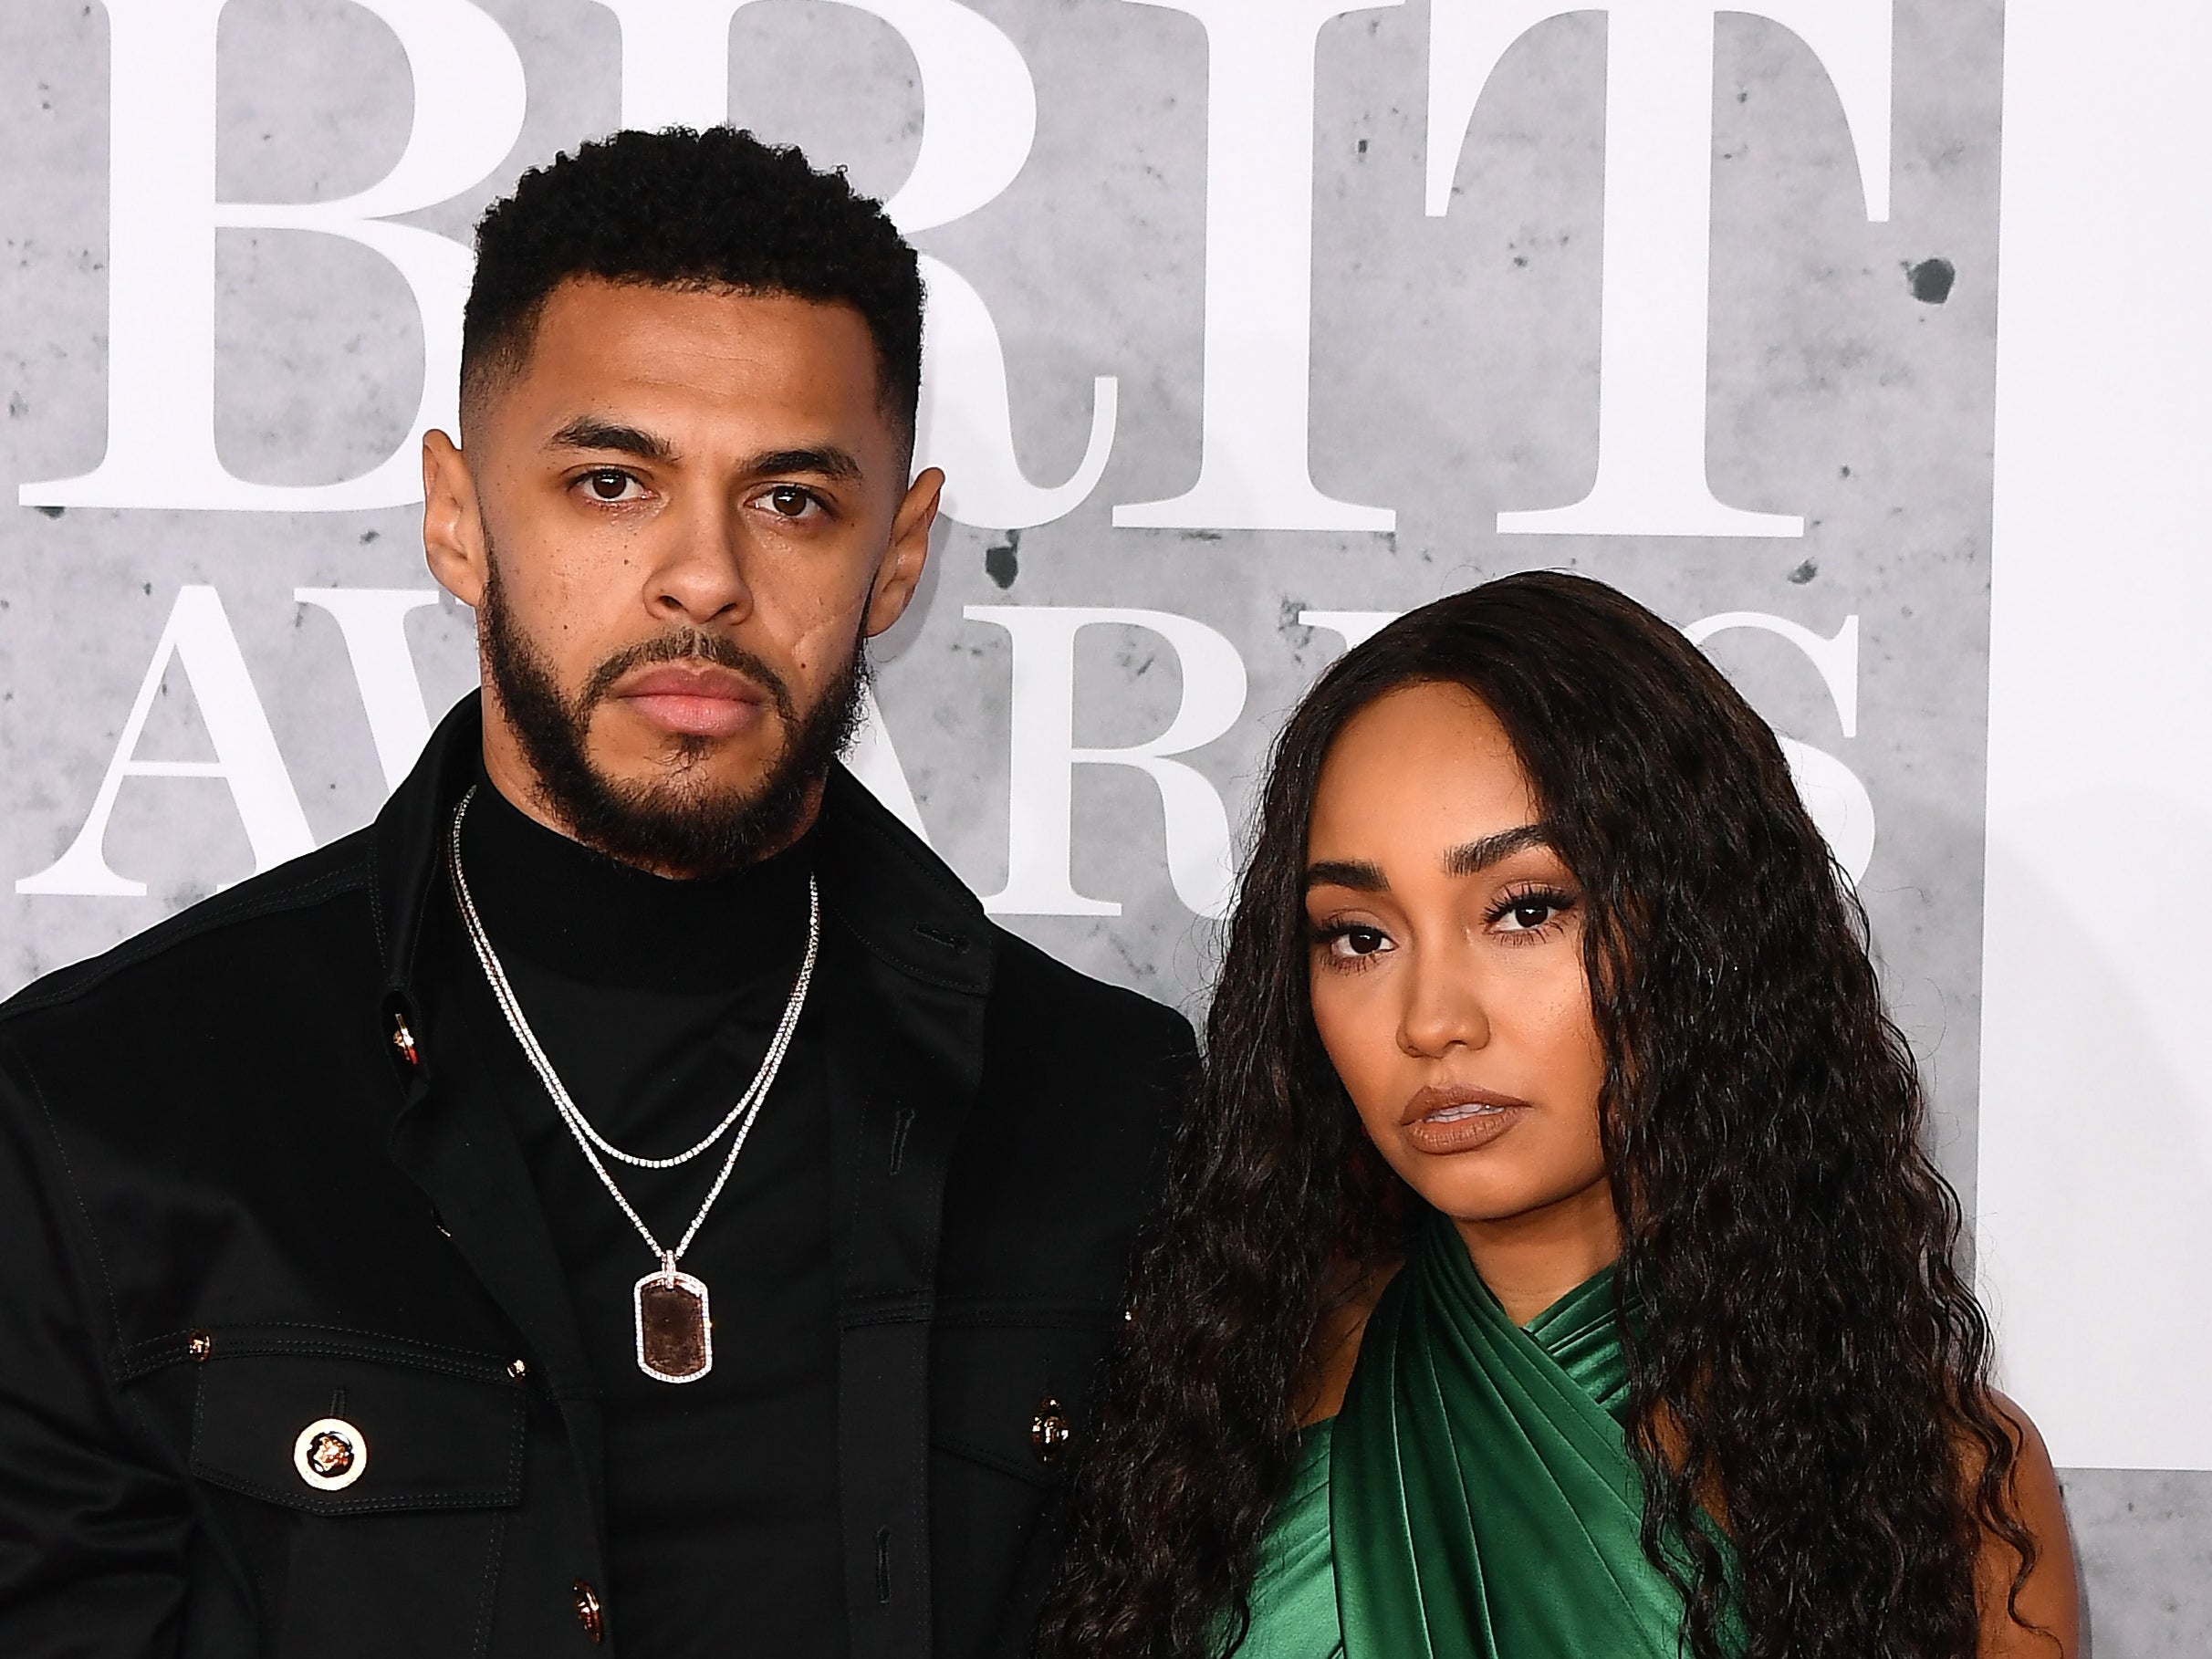 Leigh-Anne Pinnock and her husband, the footballer Andre Gray